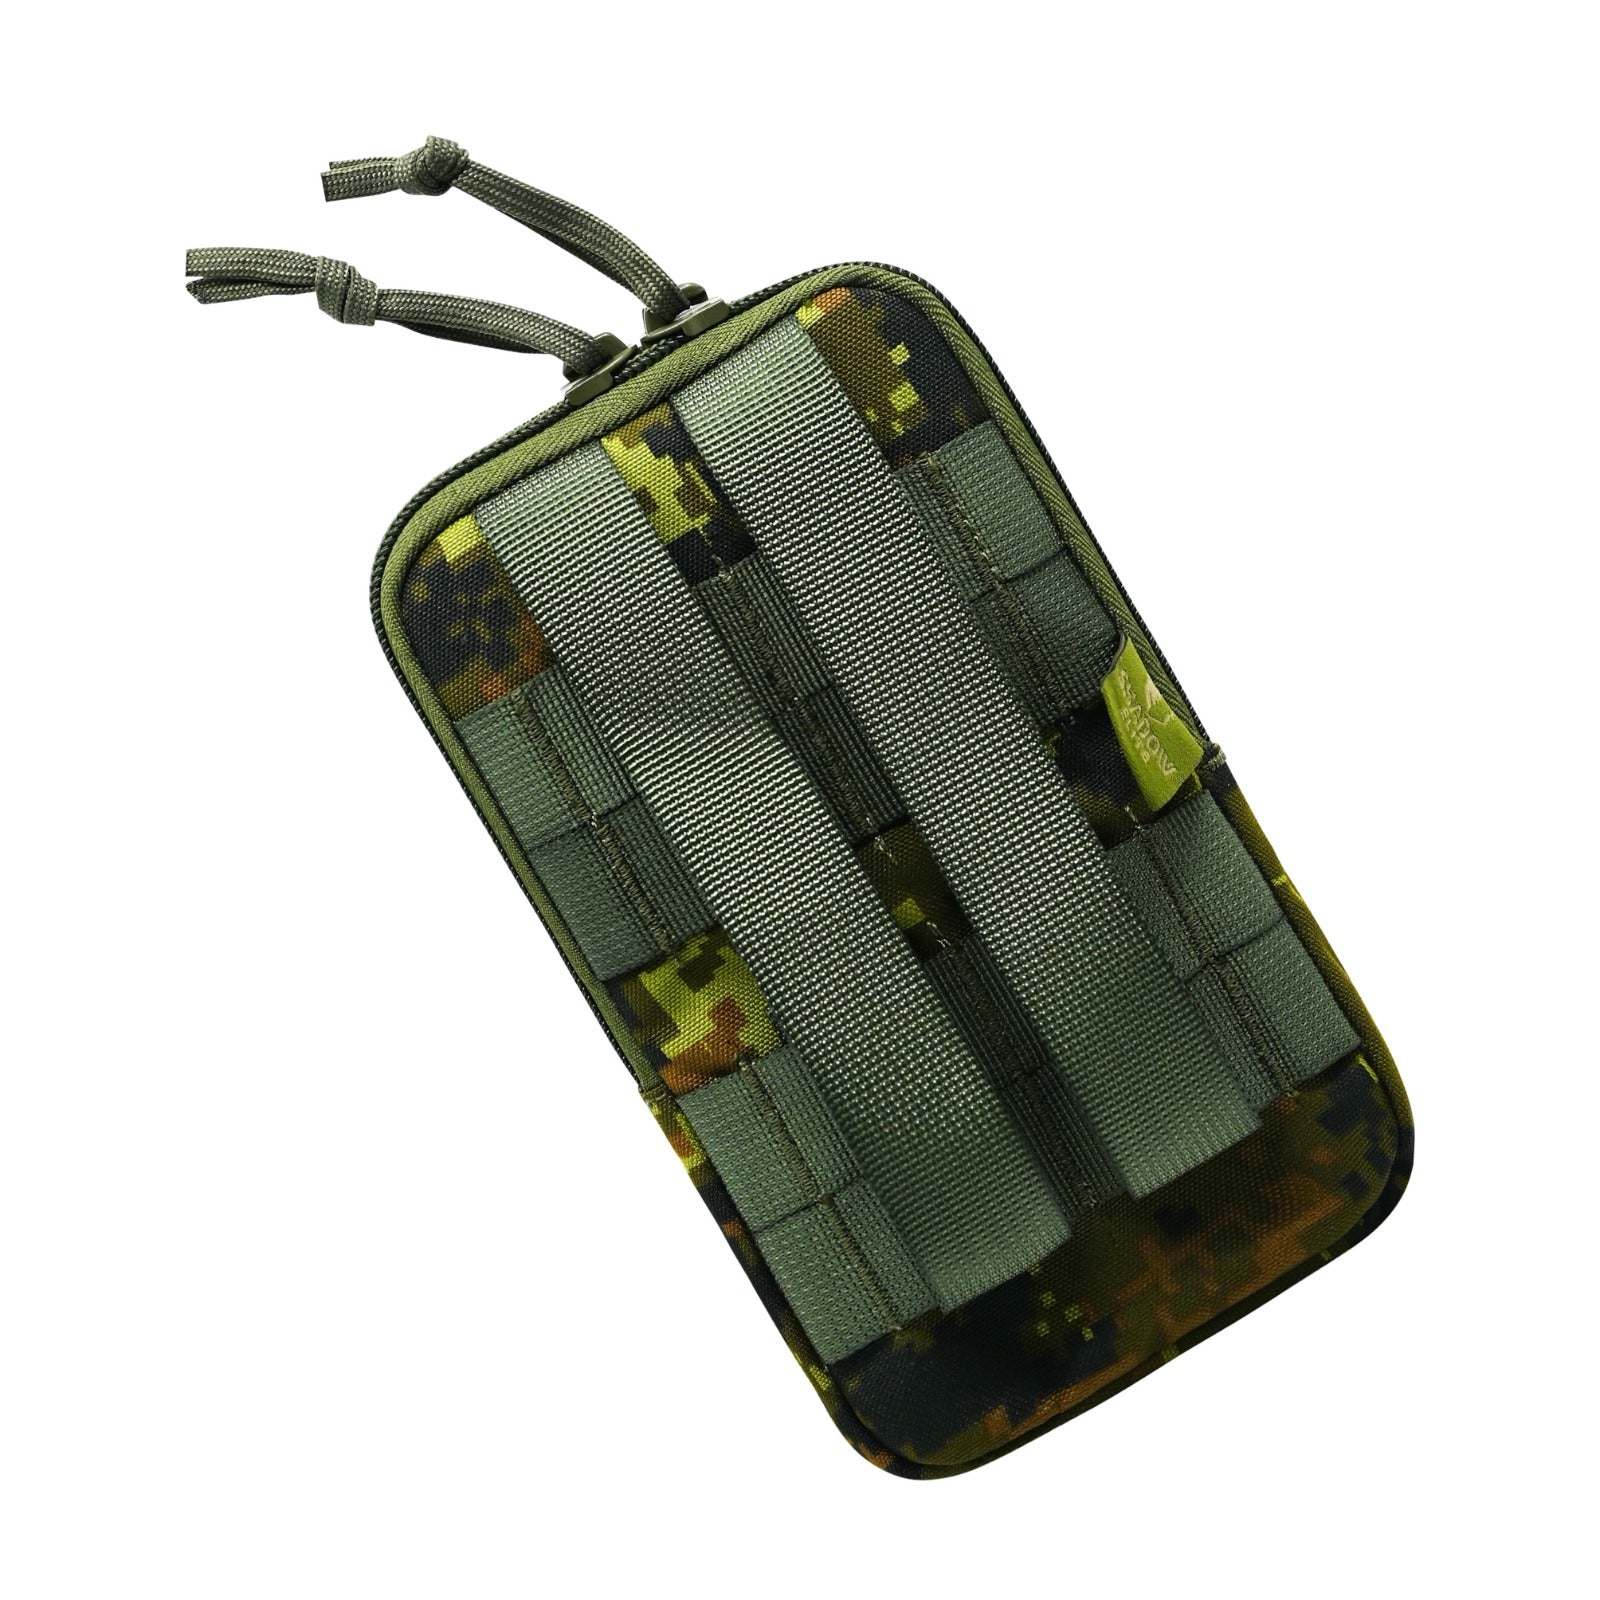 SHS-1038-Cell Phone Pouch with Molle loop-CADPAT / ESTONIAN CAMO